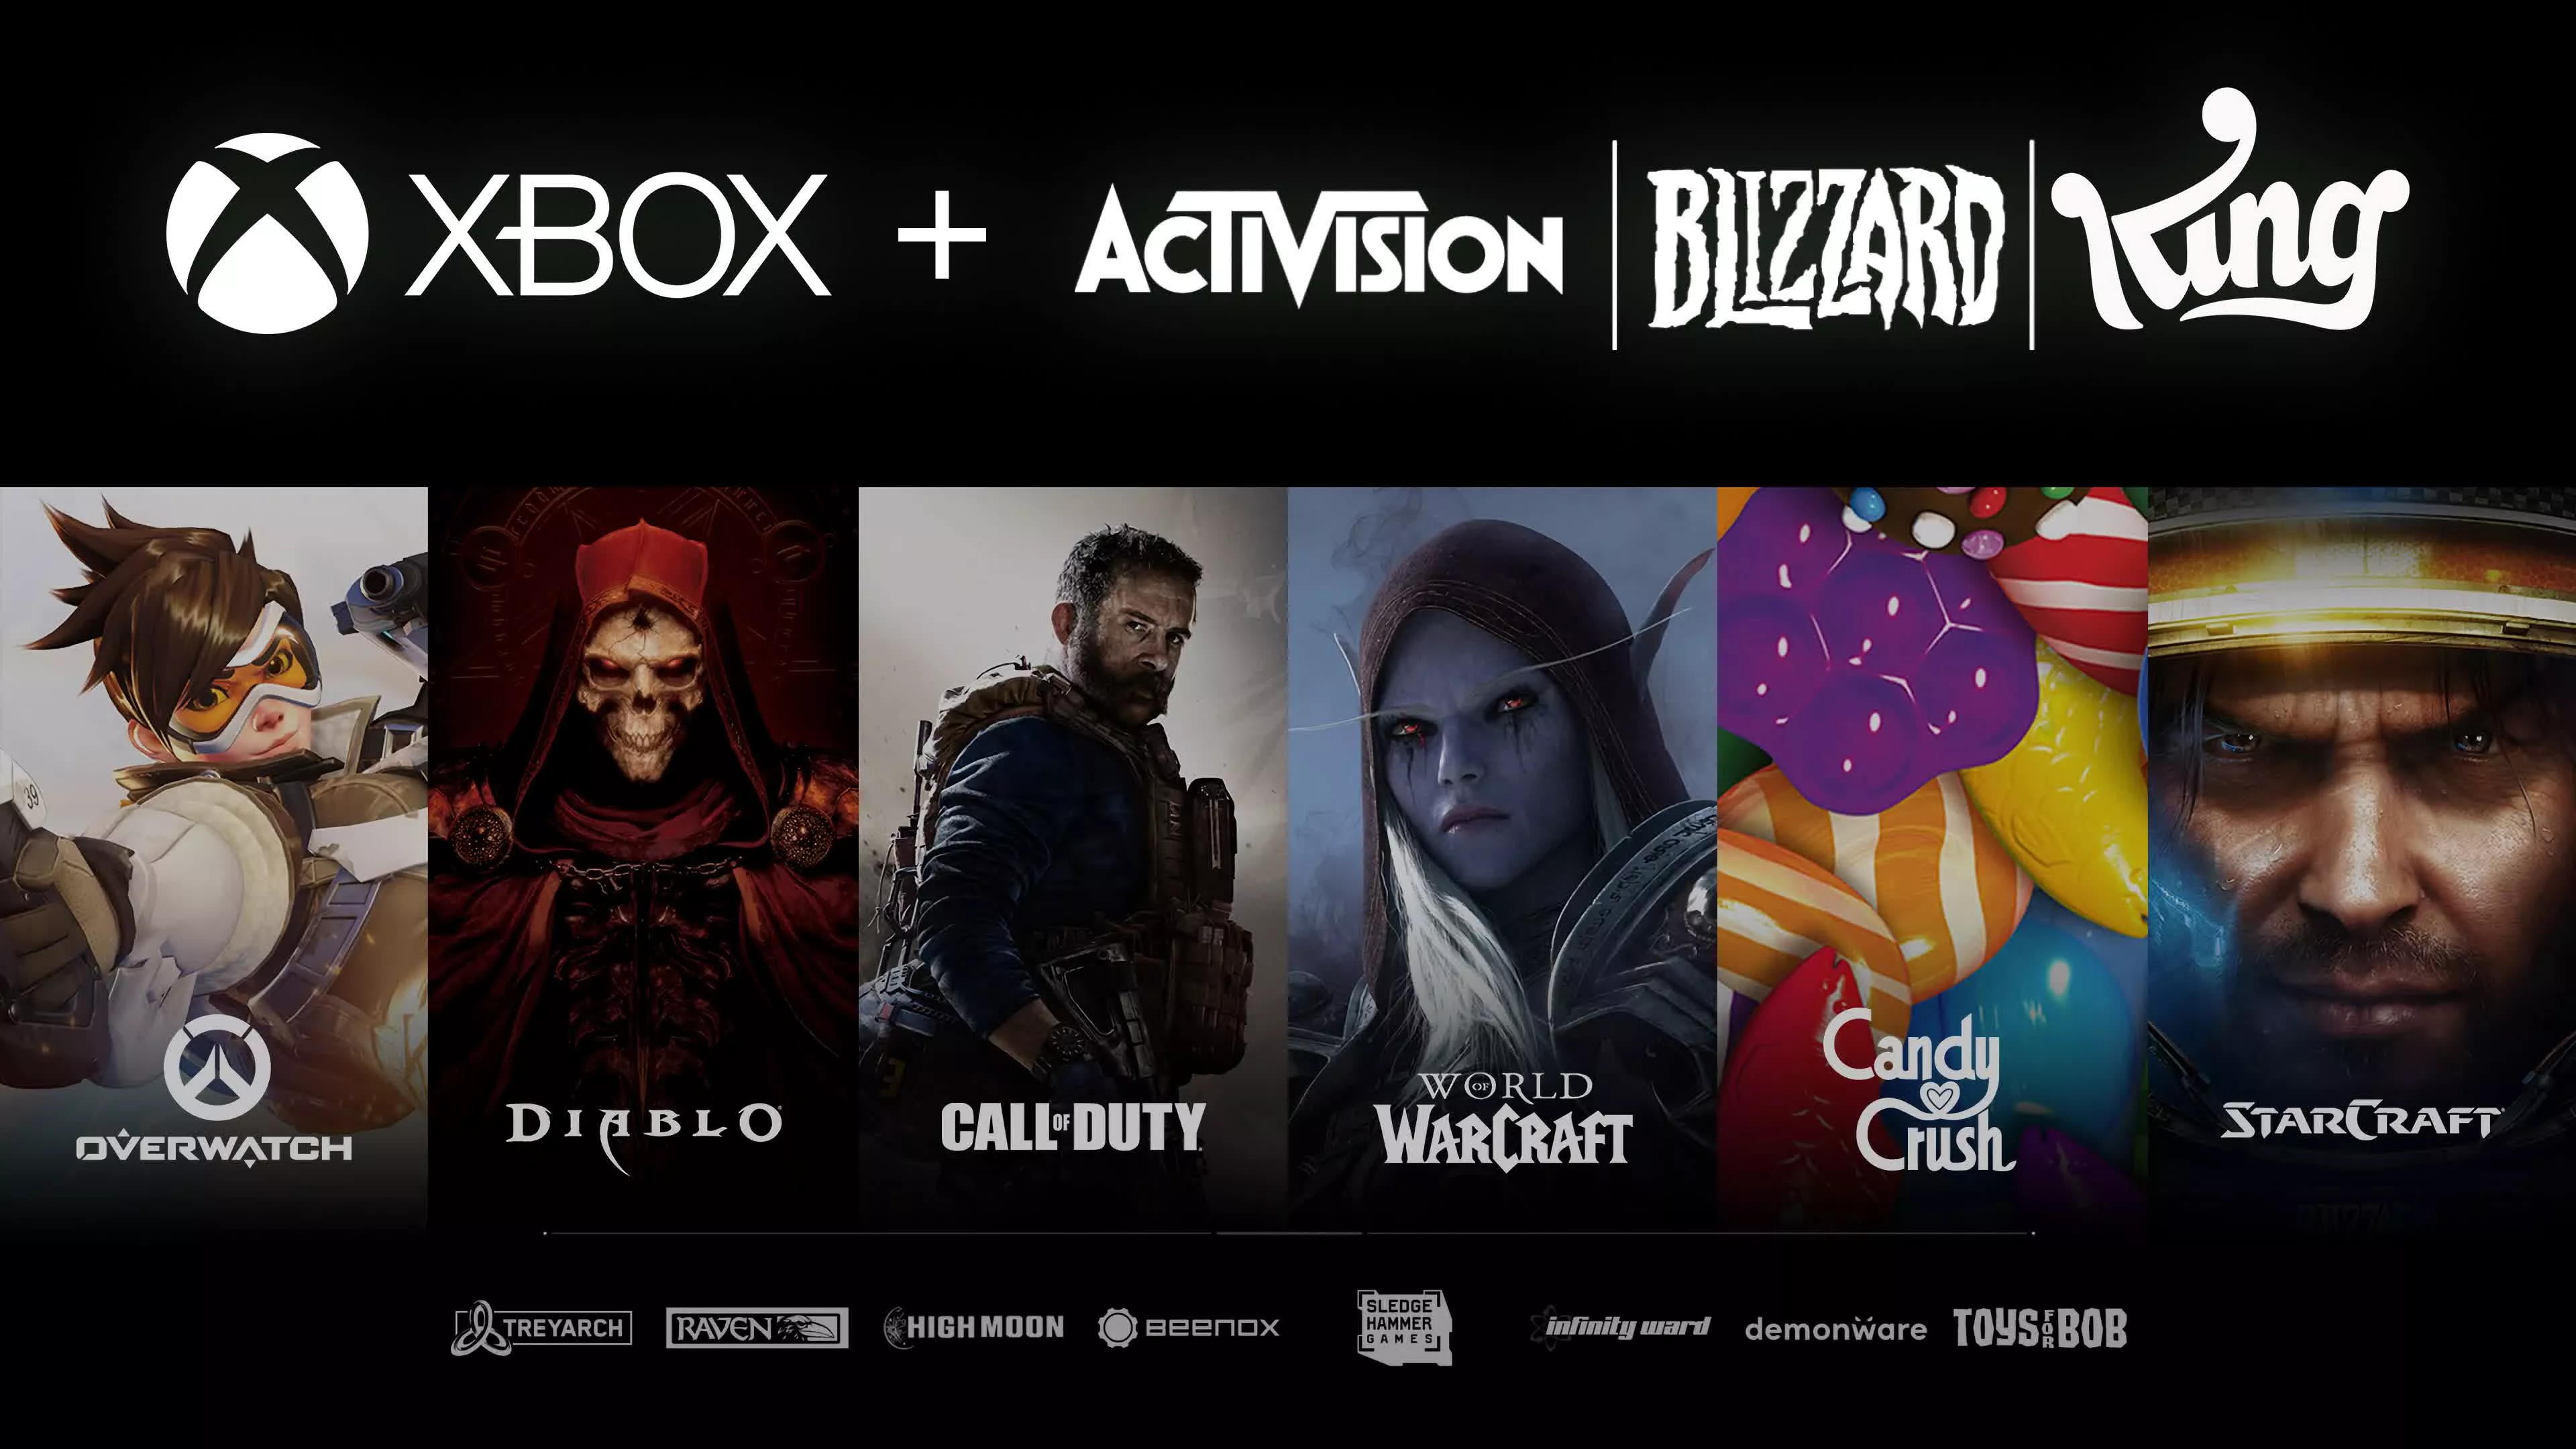 Microsoft's $69 billion acquisition of Activision Blizzard is almost complete after UK watchdog gives provisional approval